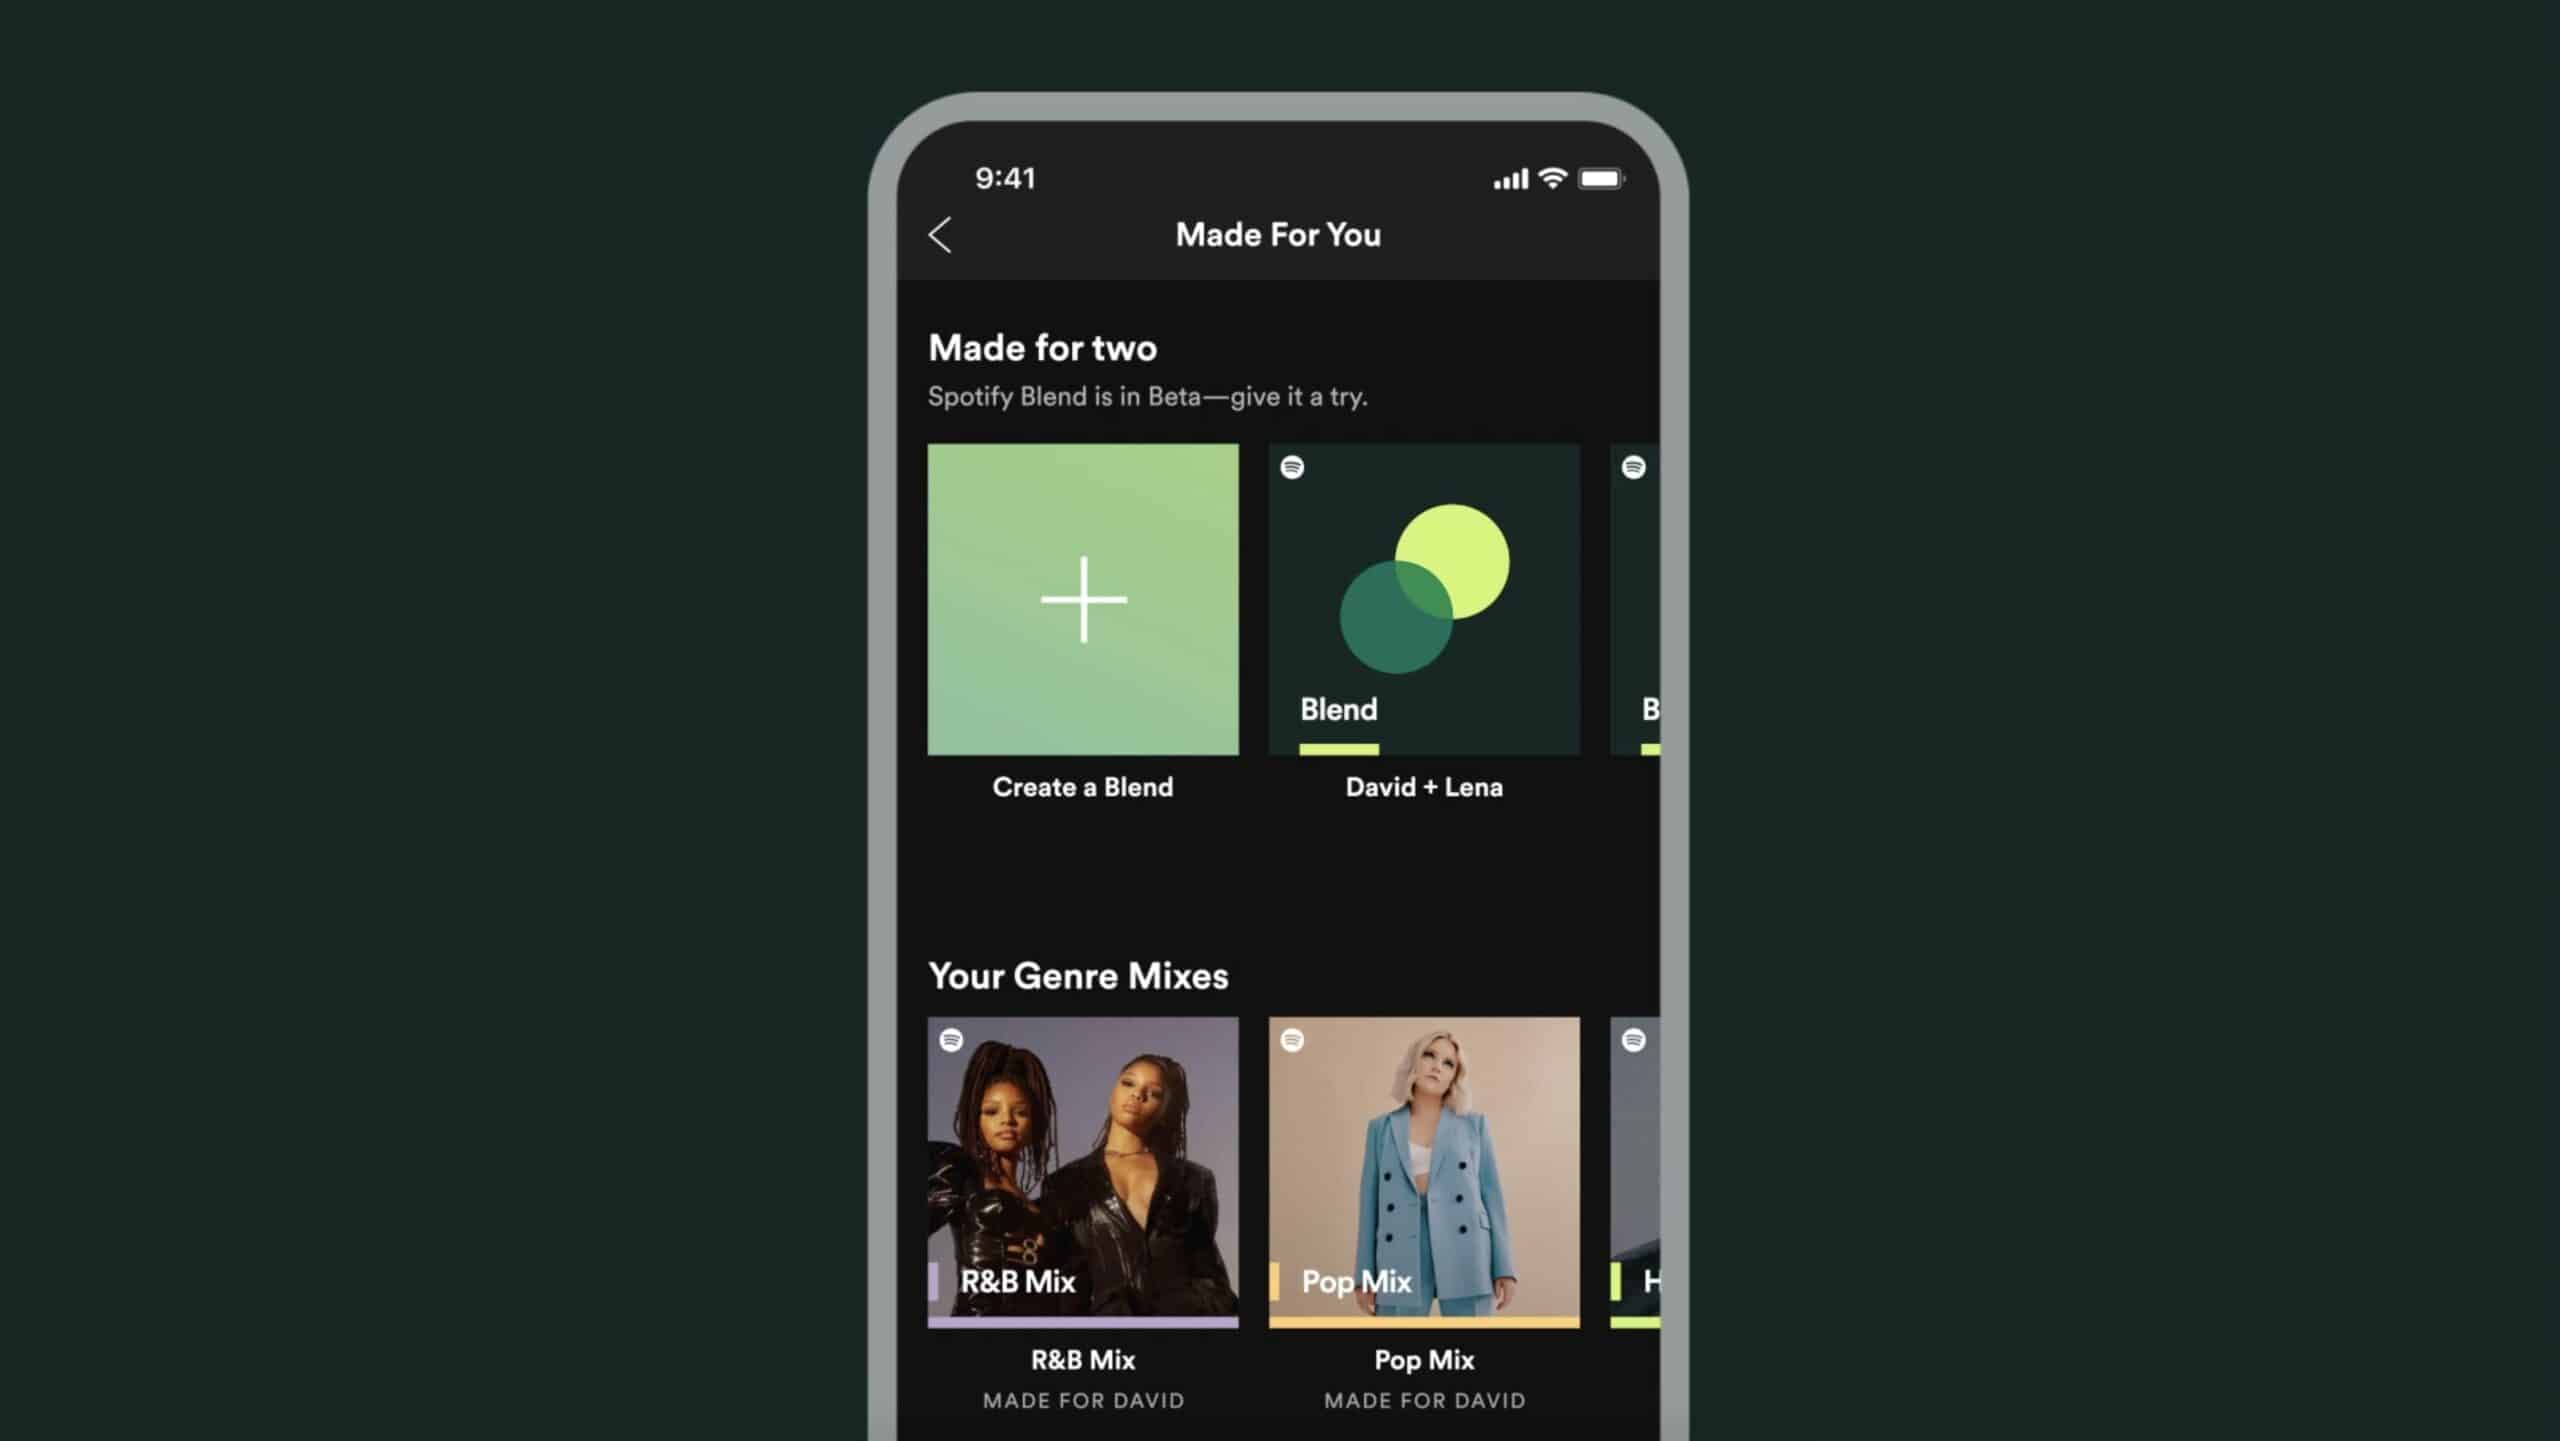 Spotify Blend lets friends gauge their musical compatibility